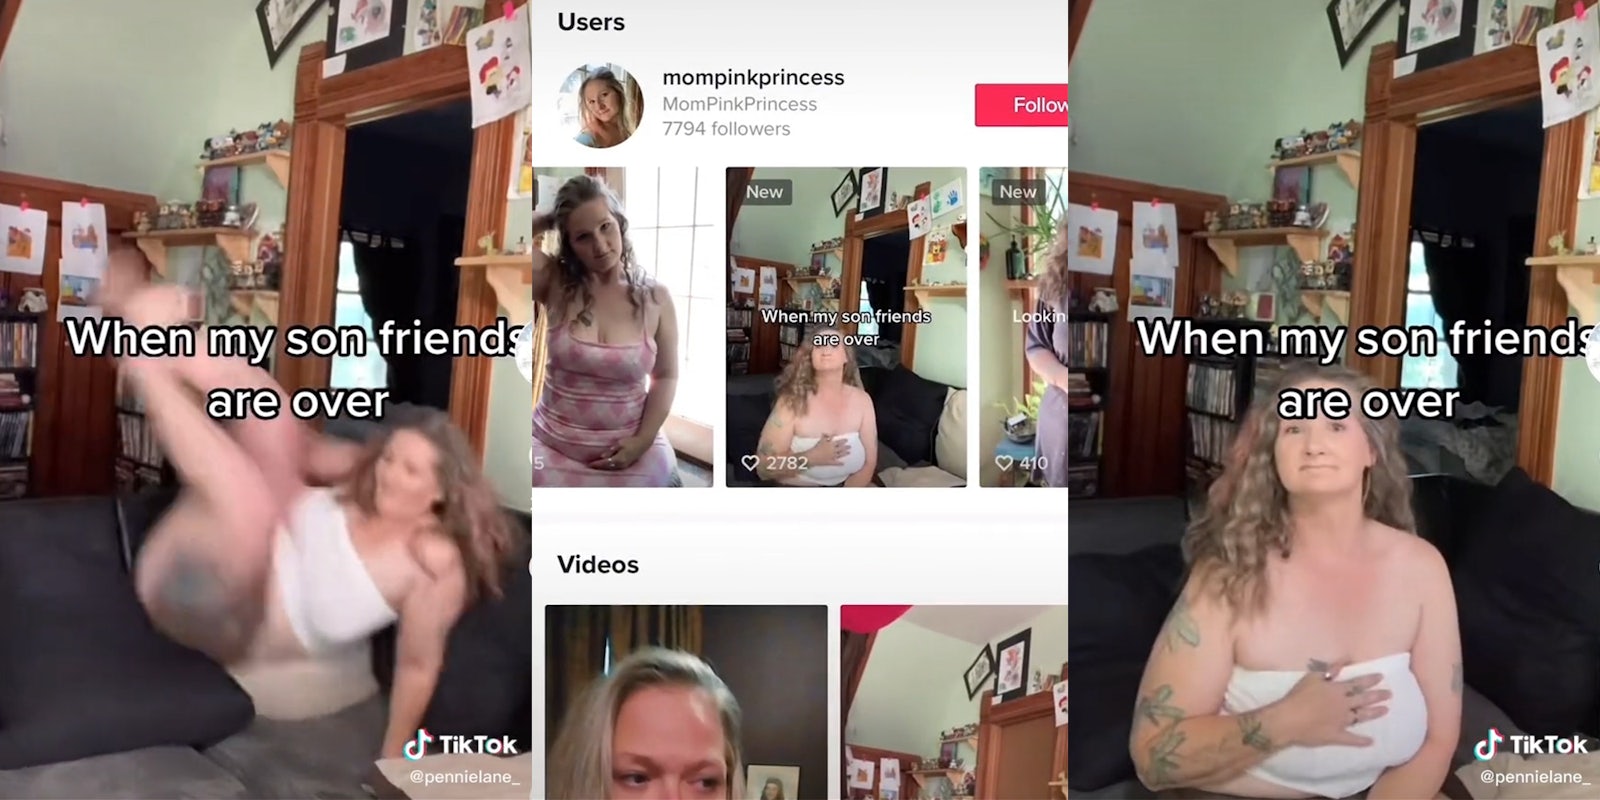 woman leaping over couch with caption 'When my son friends are over' (l) mompinkprincess TikTok user page (c) woman on couch with caption 'When my son friends are over' (r)